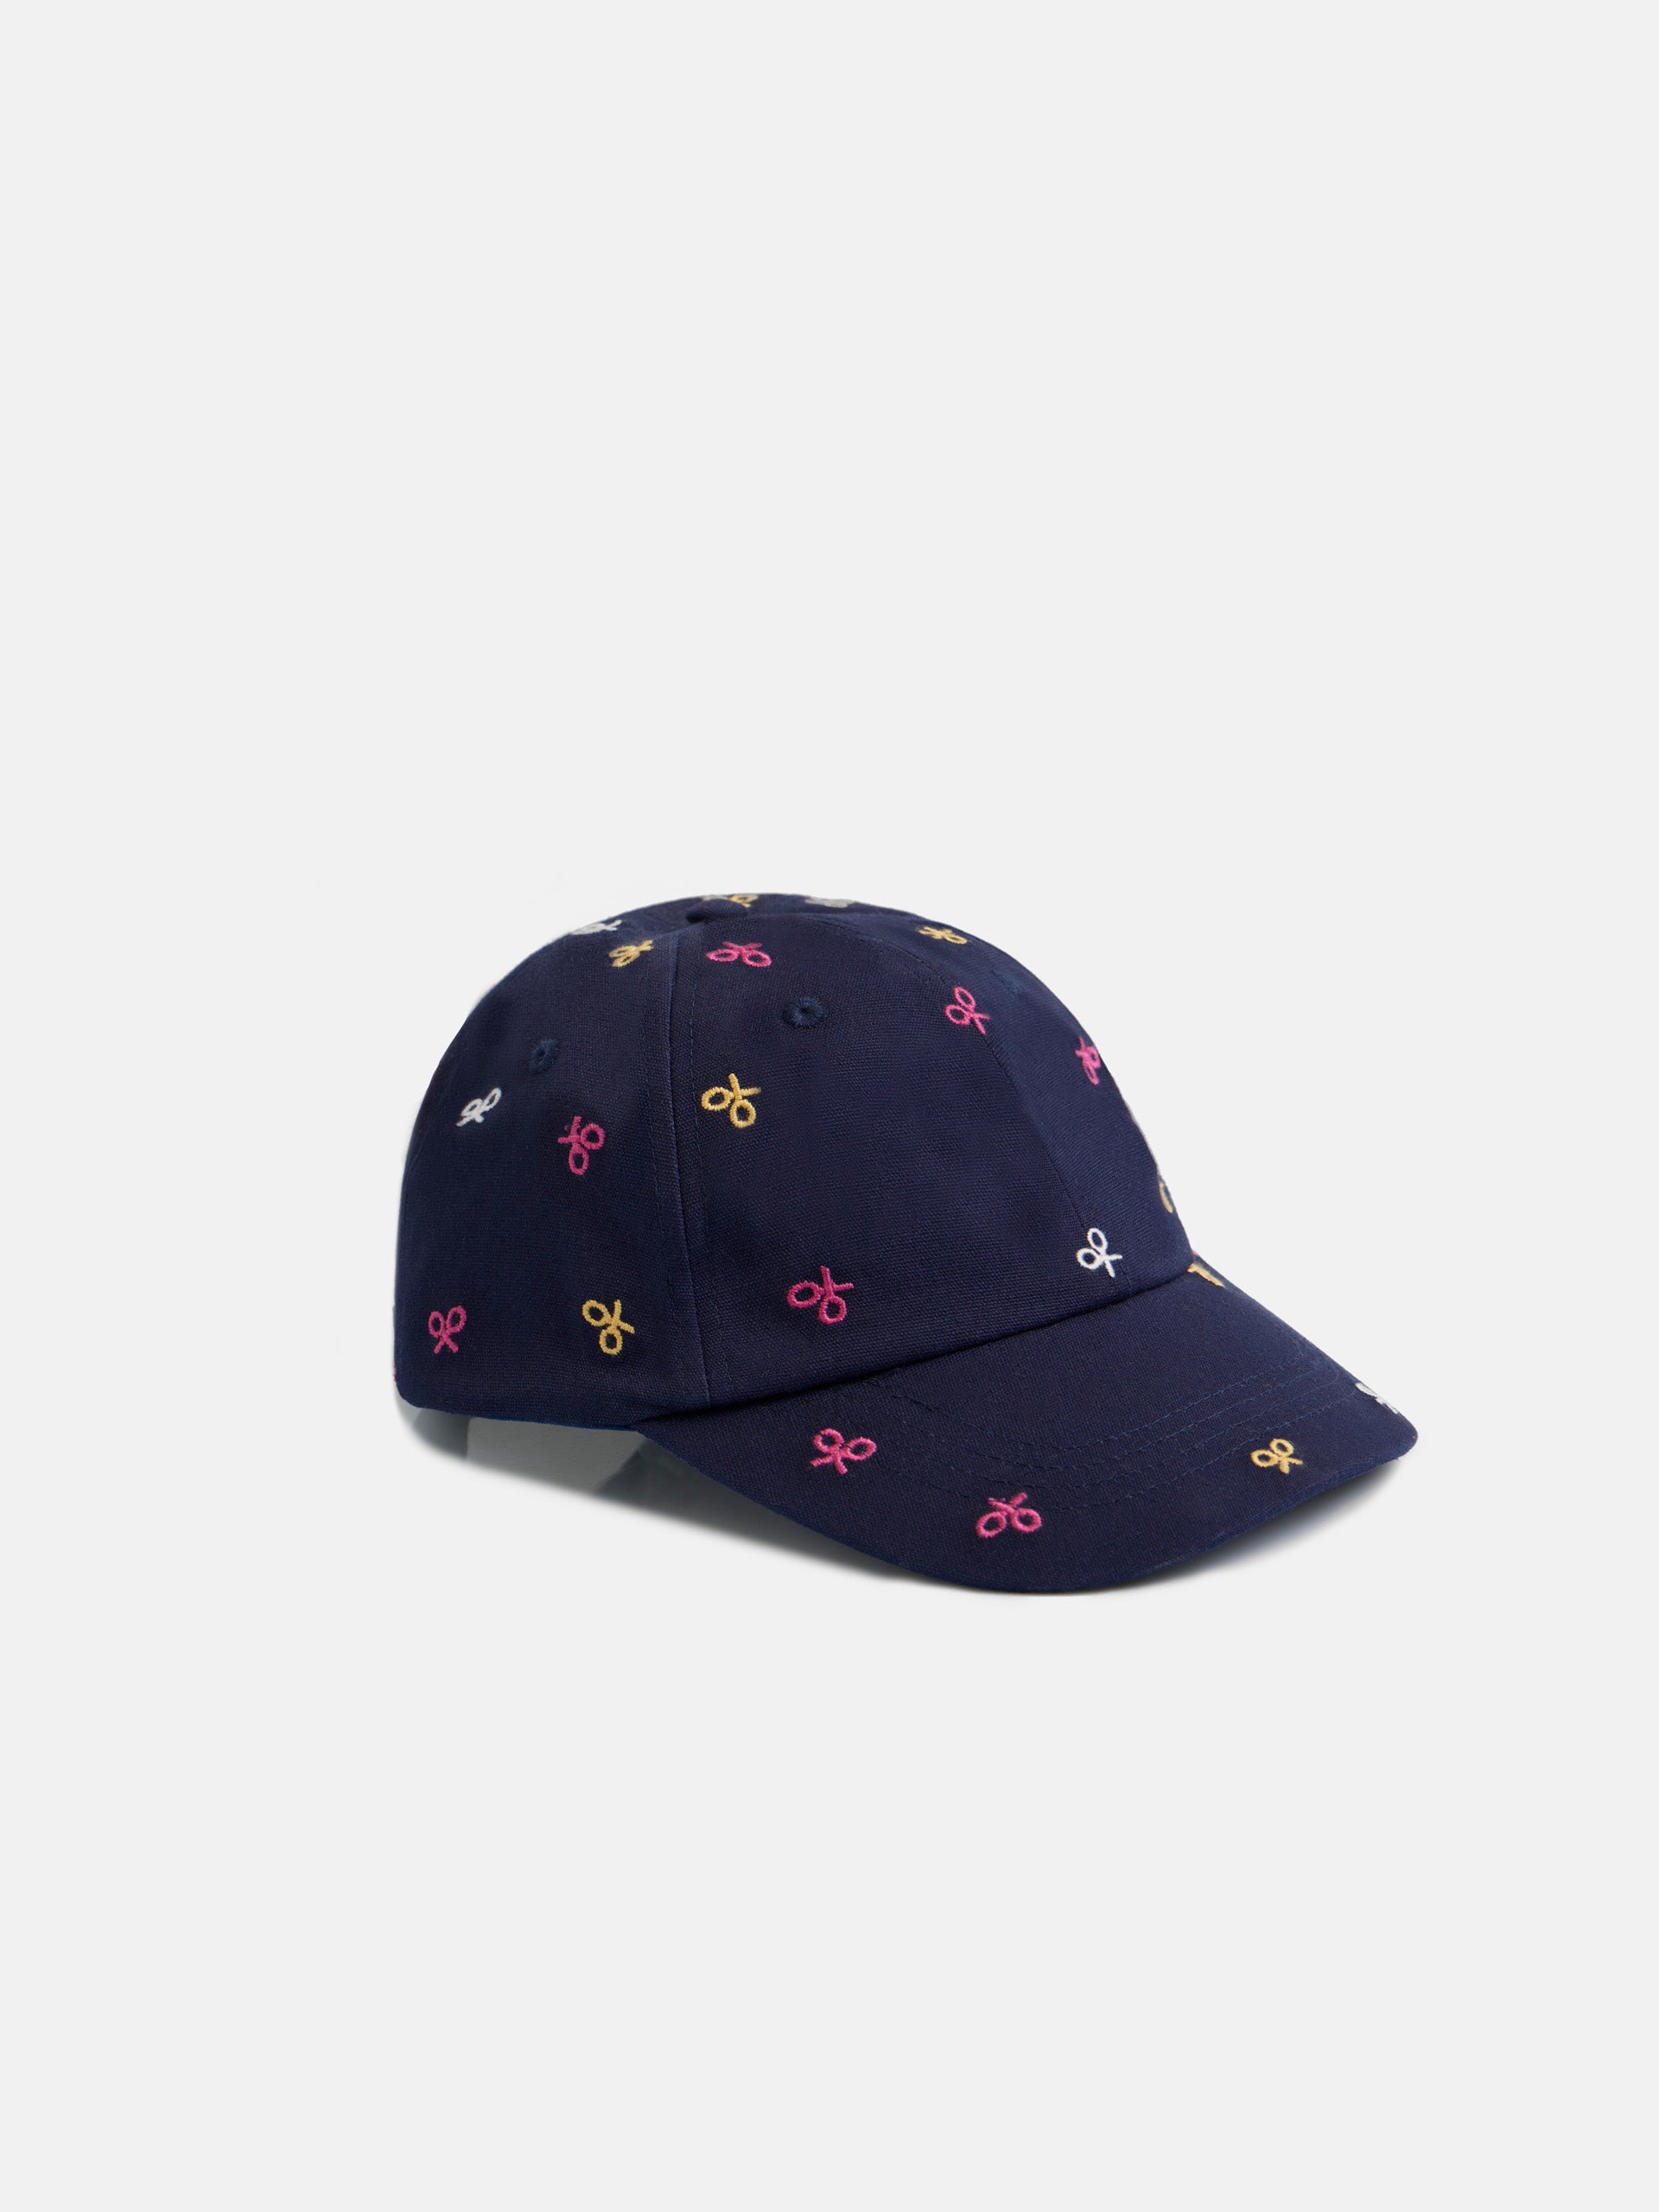 Navy blue embroidered rackets cap